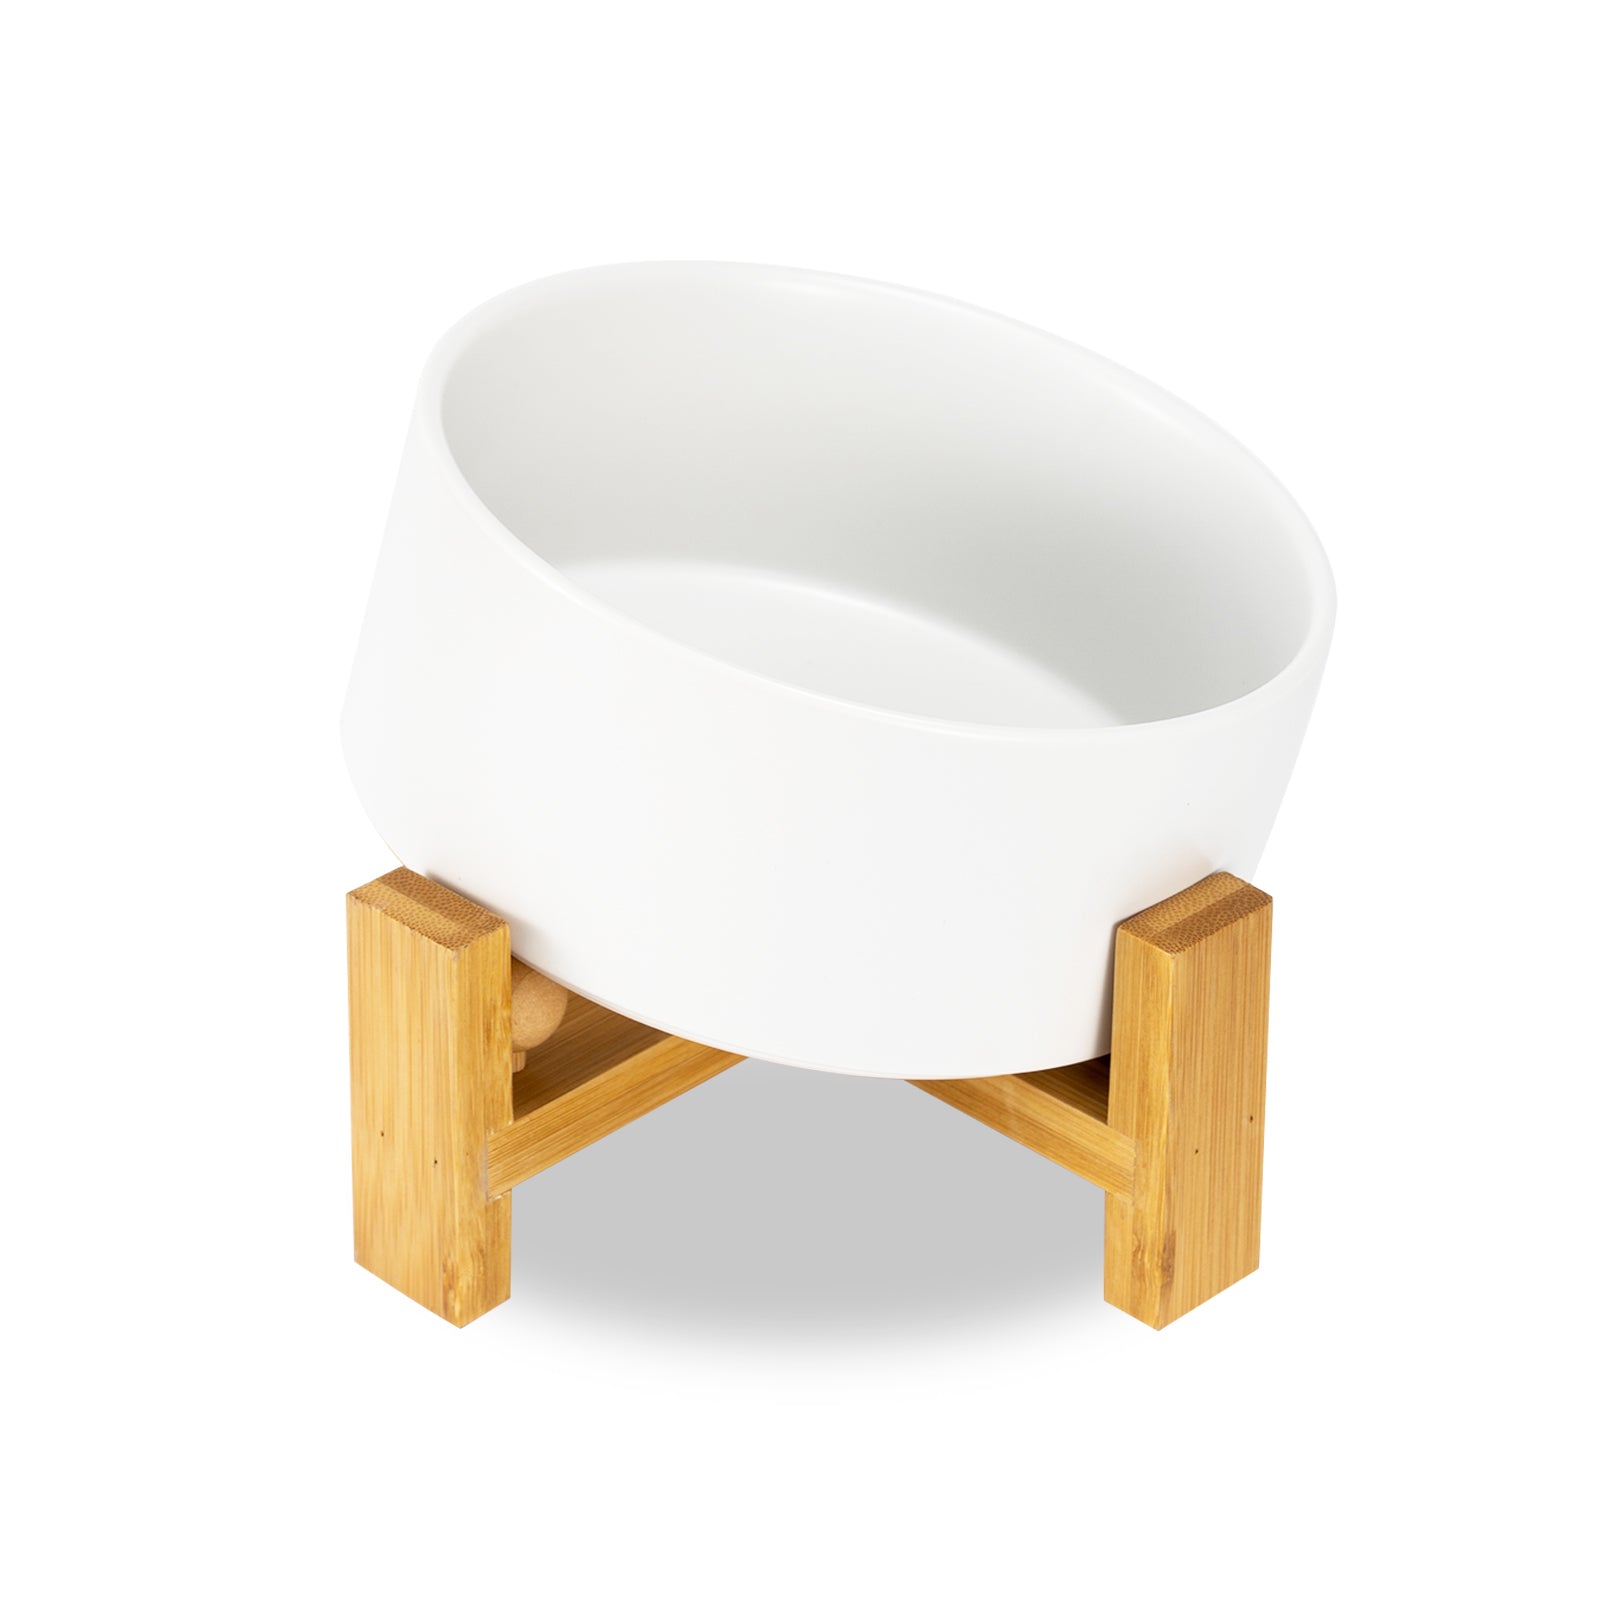 a white 15° tilted dog bowl of front view